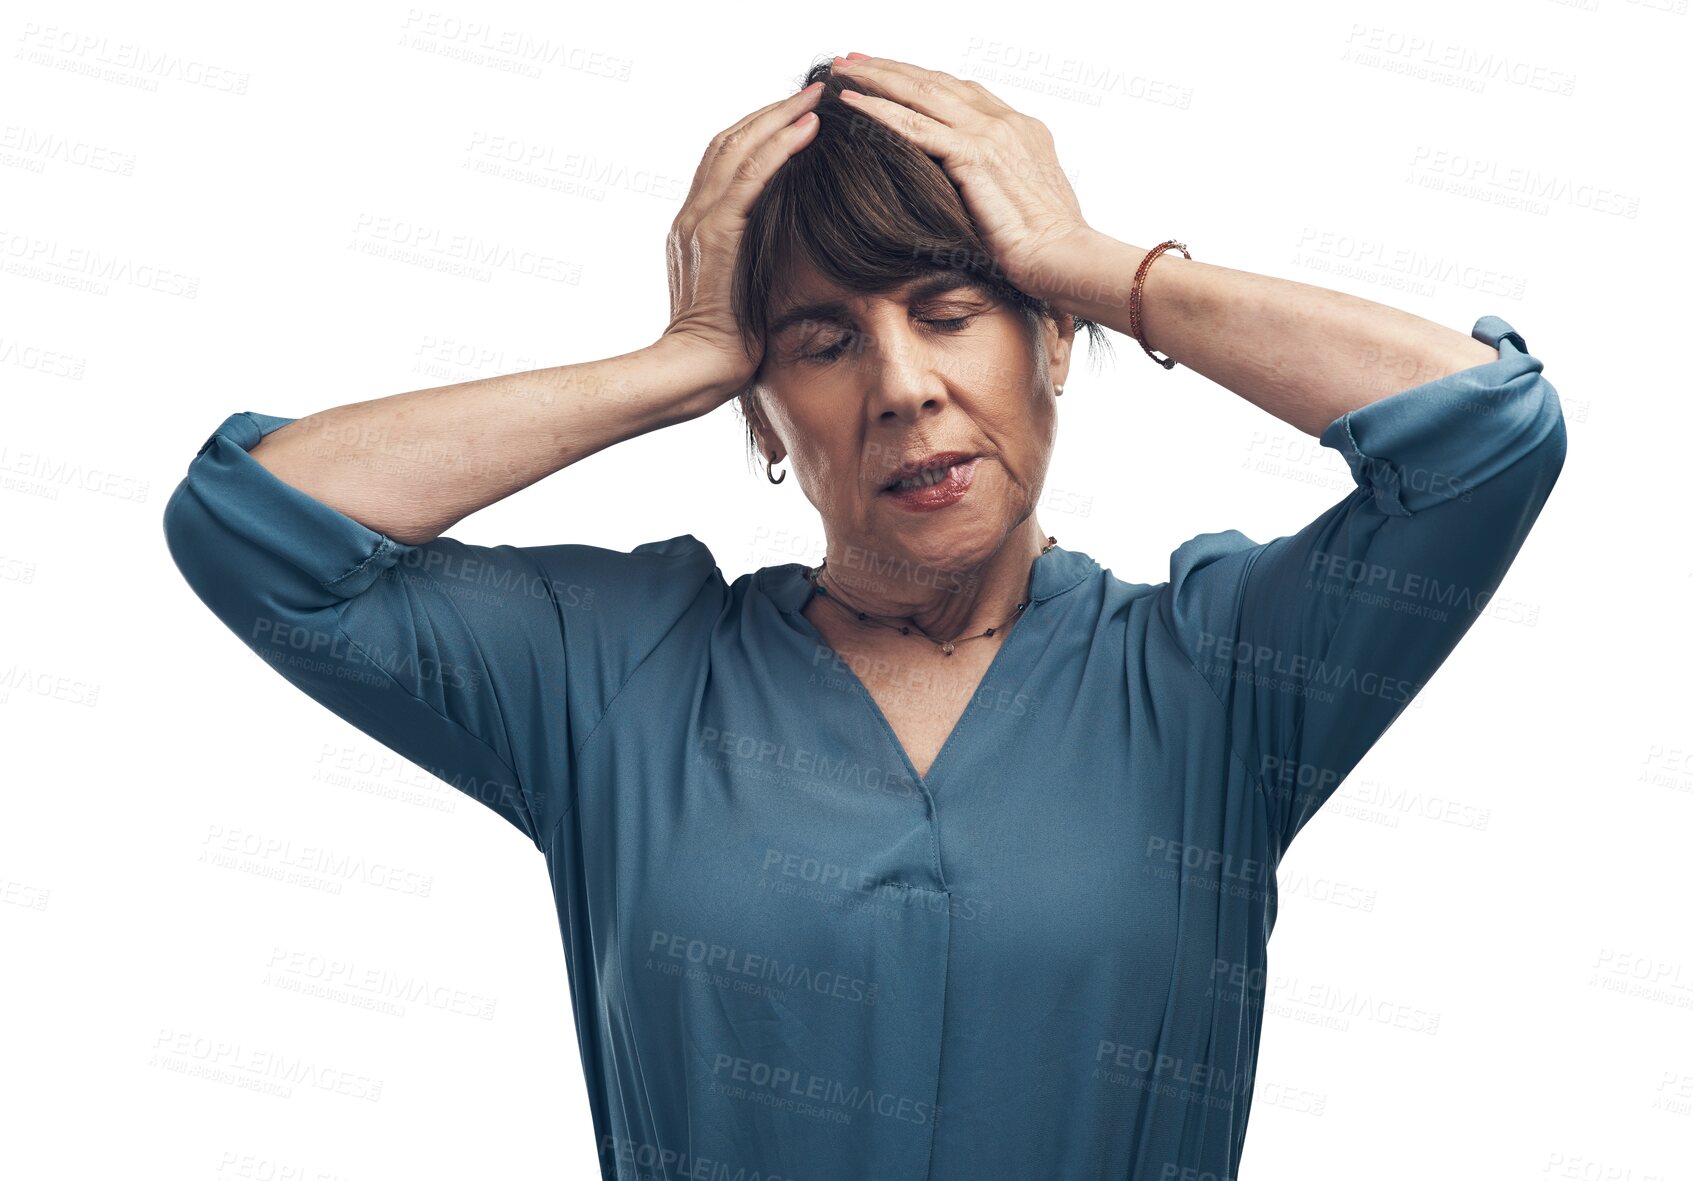 Buy stock photo Stress, headache and woman with hands on head in pain, sore migraine or fatigue on isolated, transparent or PNG background. Businesswoman, tired and working in burnout or exhausted mental health